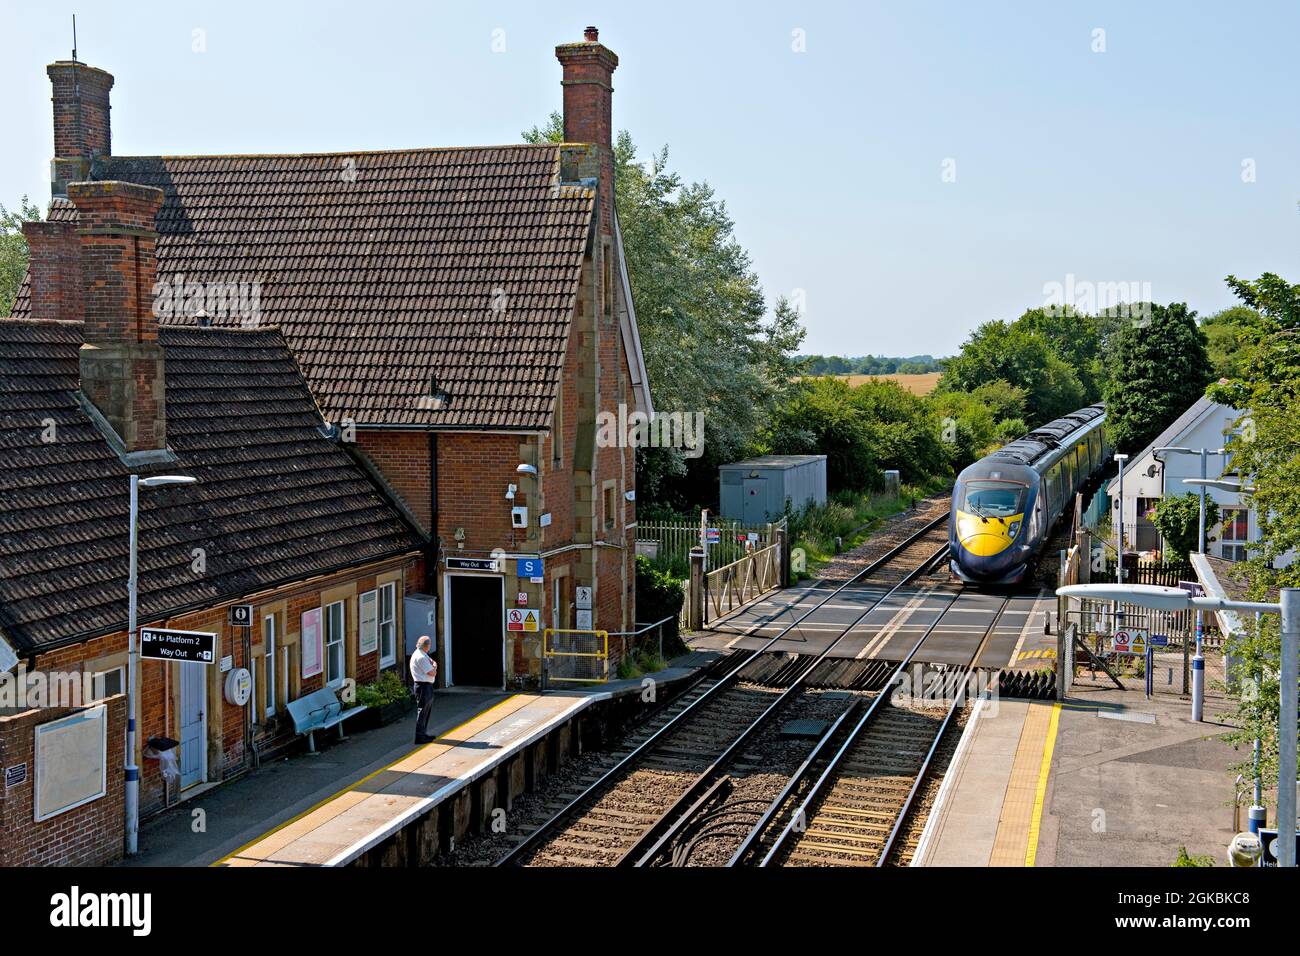 British Rail Class 395 'Javelin' train approaching the manually operated level crossing at Wye railway station in Kent, UK Stock Photo